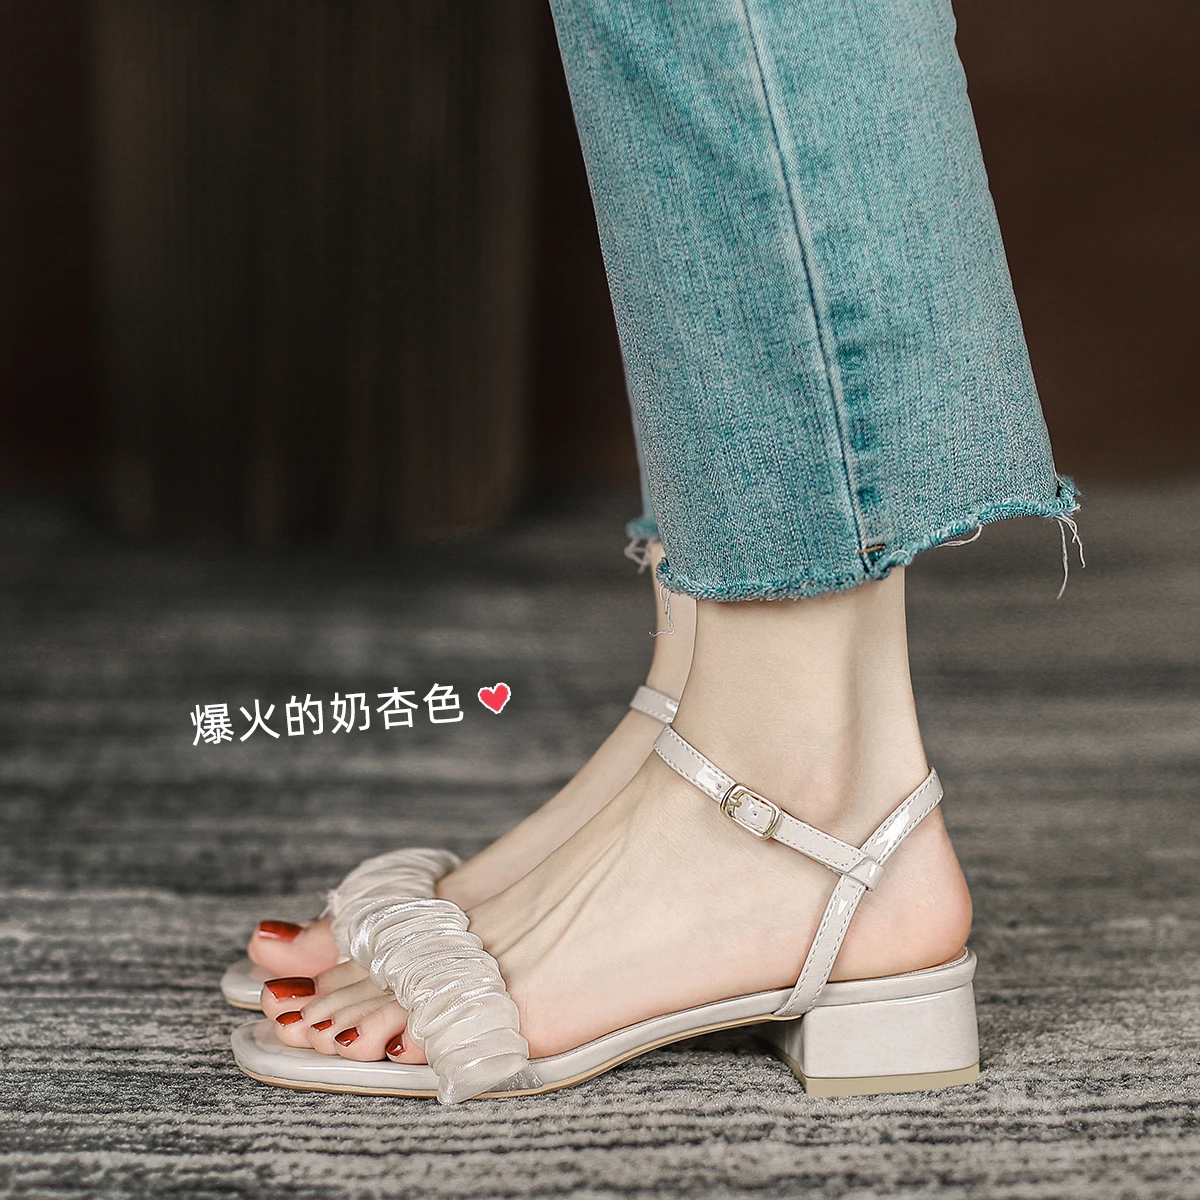 

2022 African Woman Shoe Peep Toe Nude Espadrille Heel Branded Pumps Sweet Chunky Sandals Latest Burgundy Ethnic Fashion Brief Be